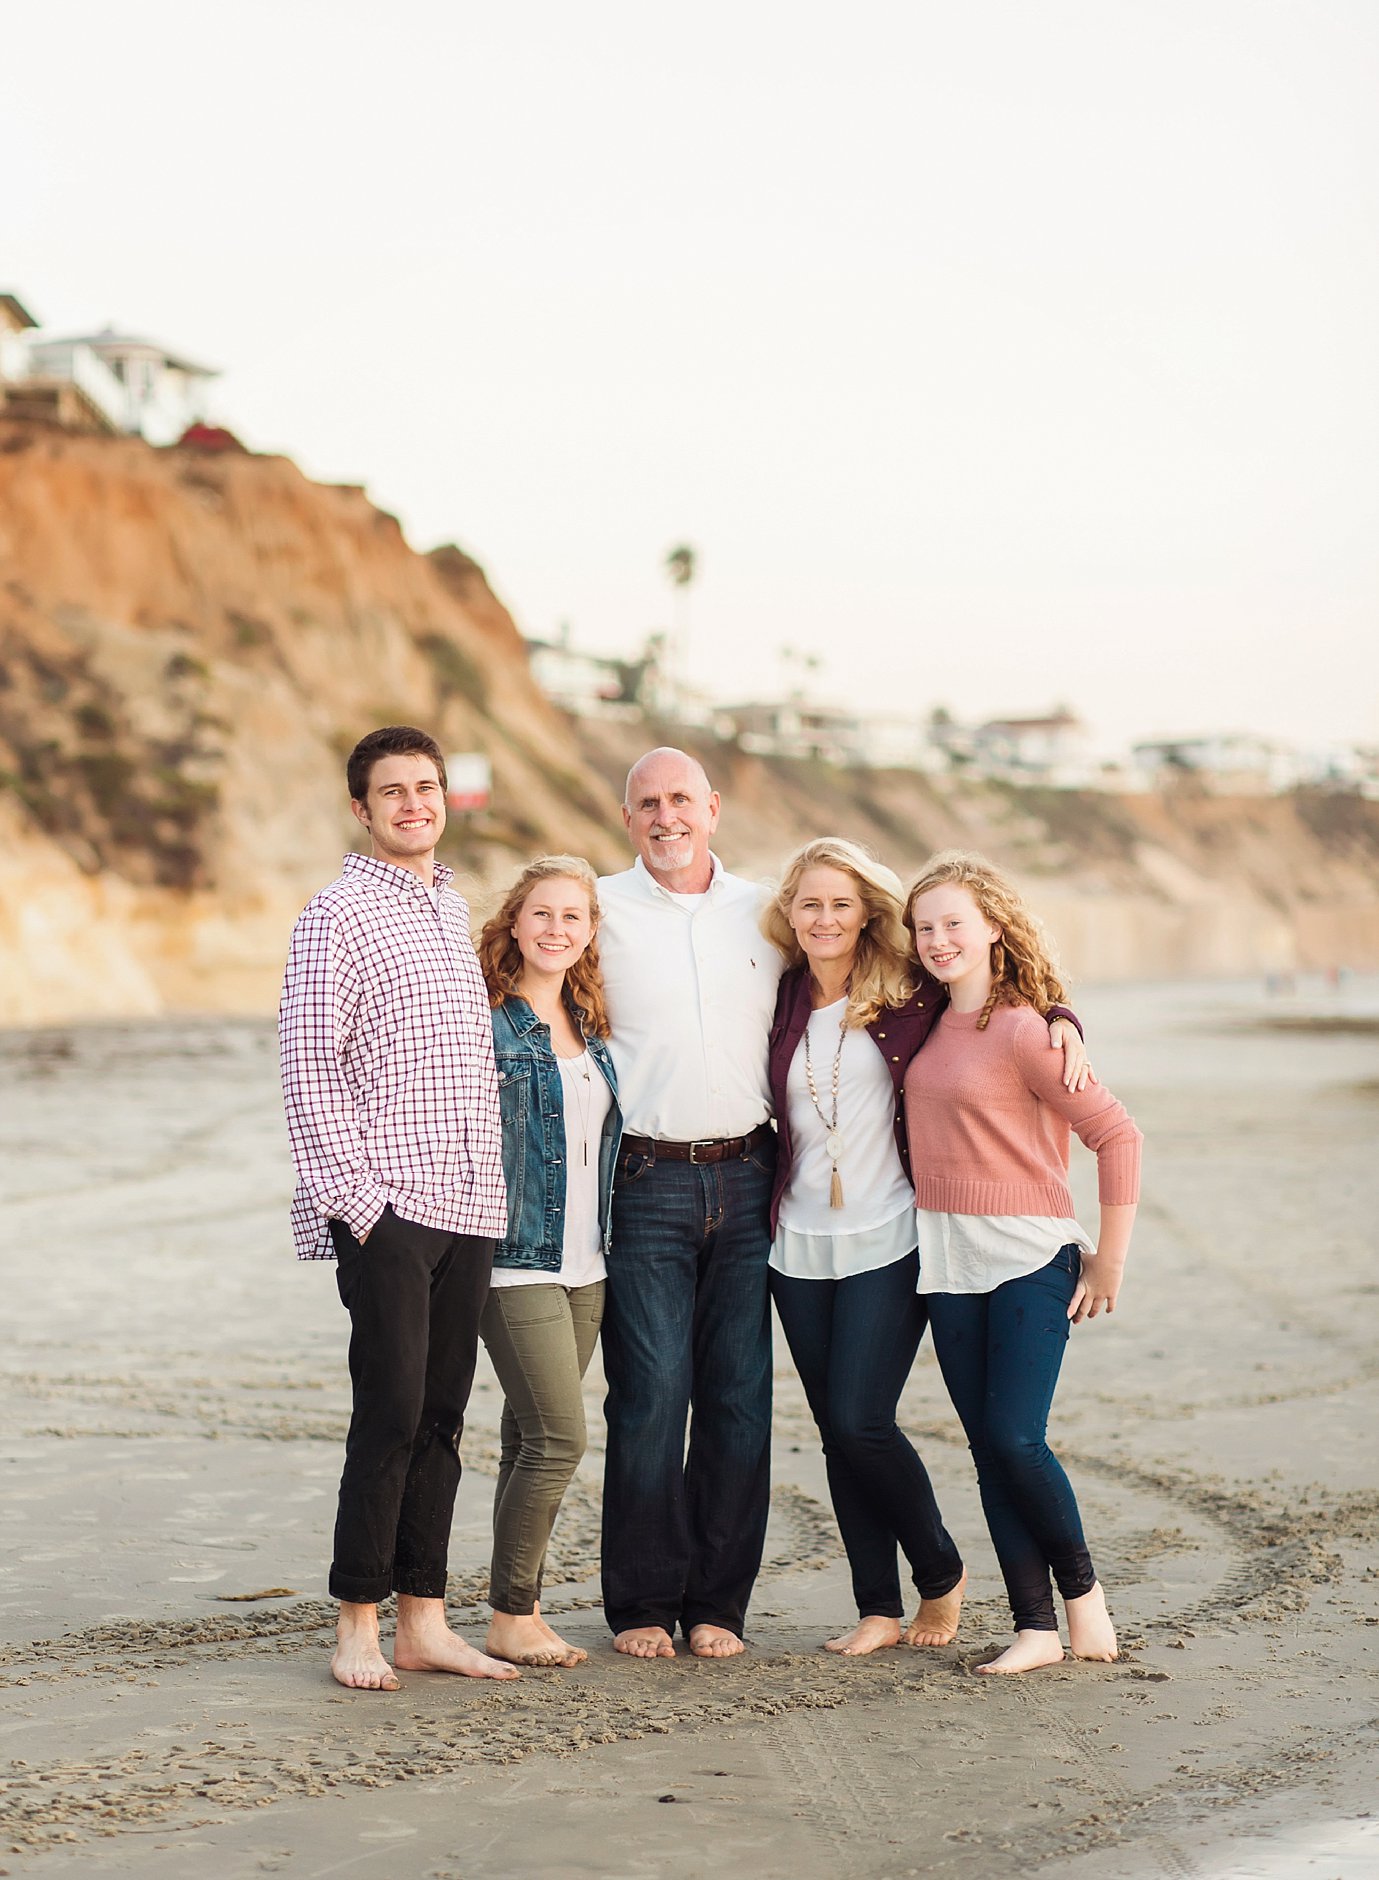 Cardiff Family Photographer | Doherty Family | Cardiff State Beach